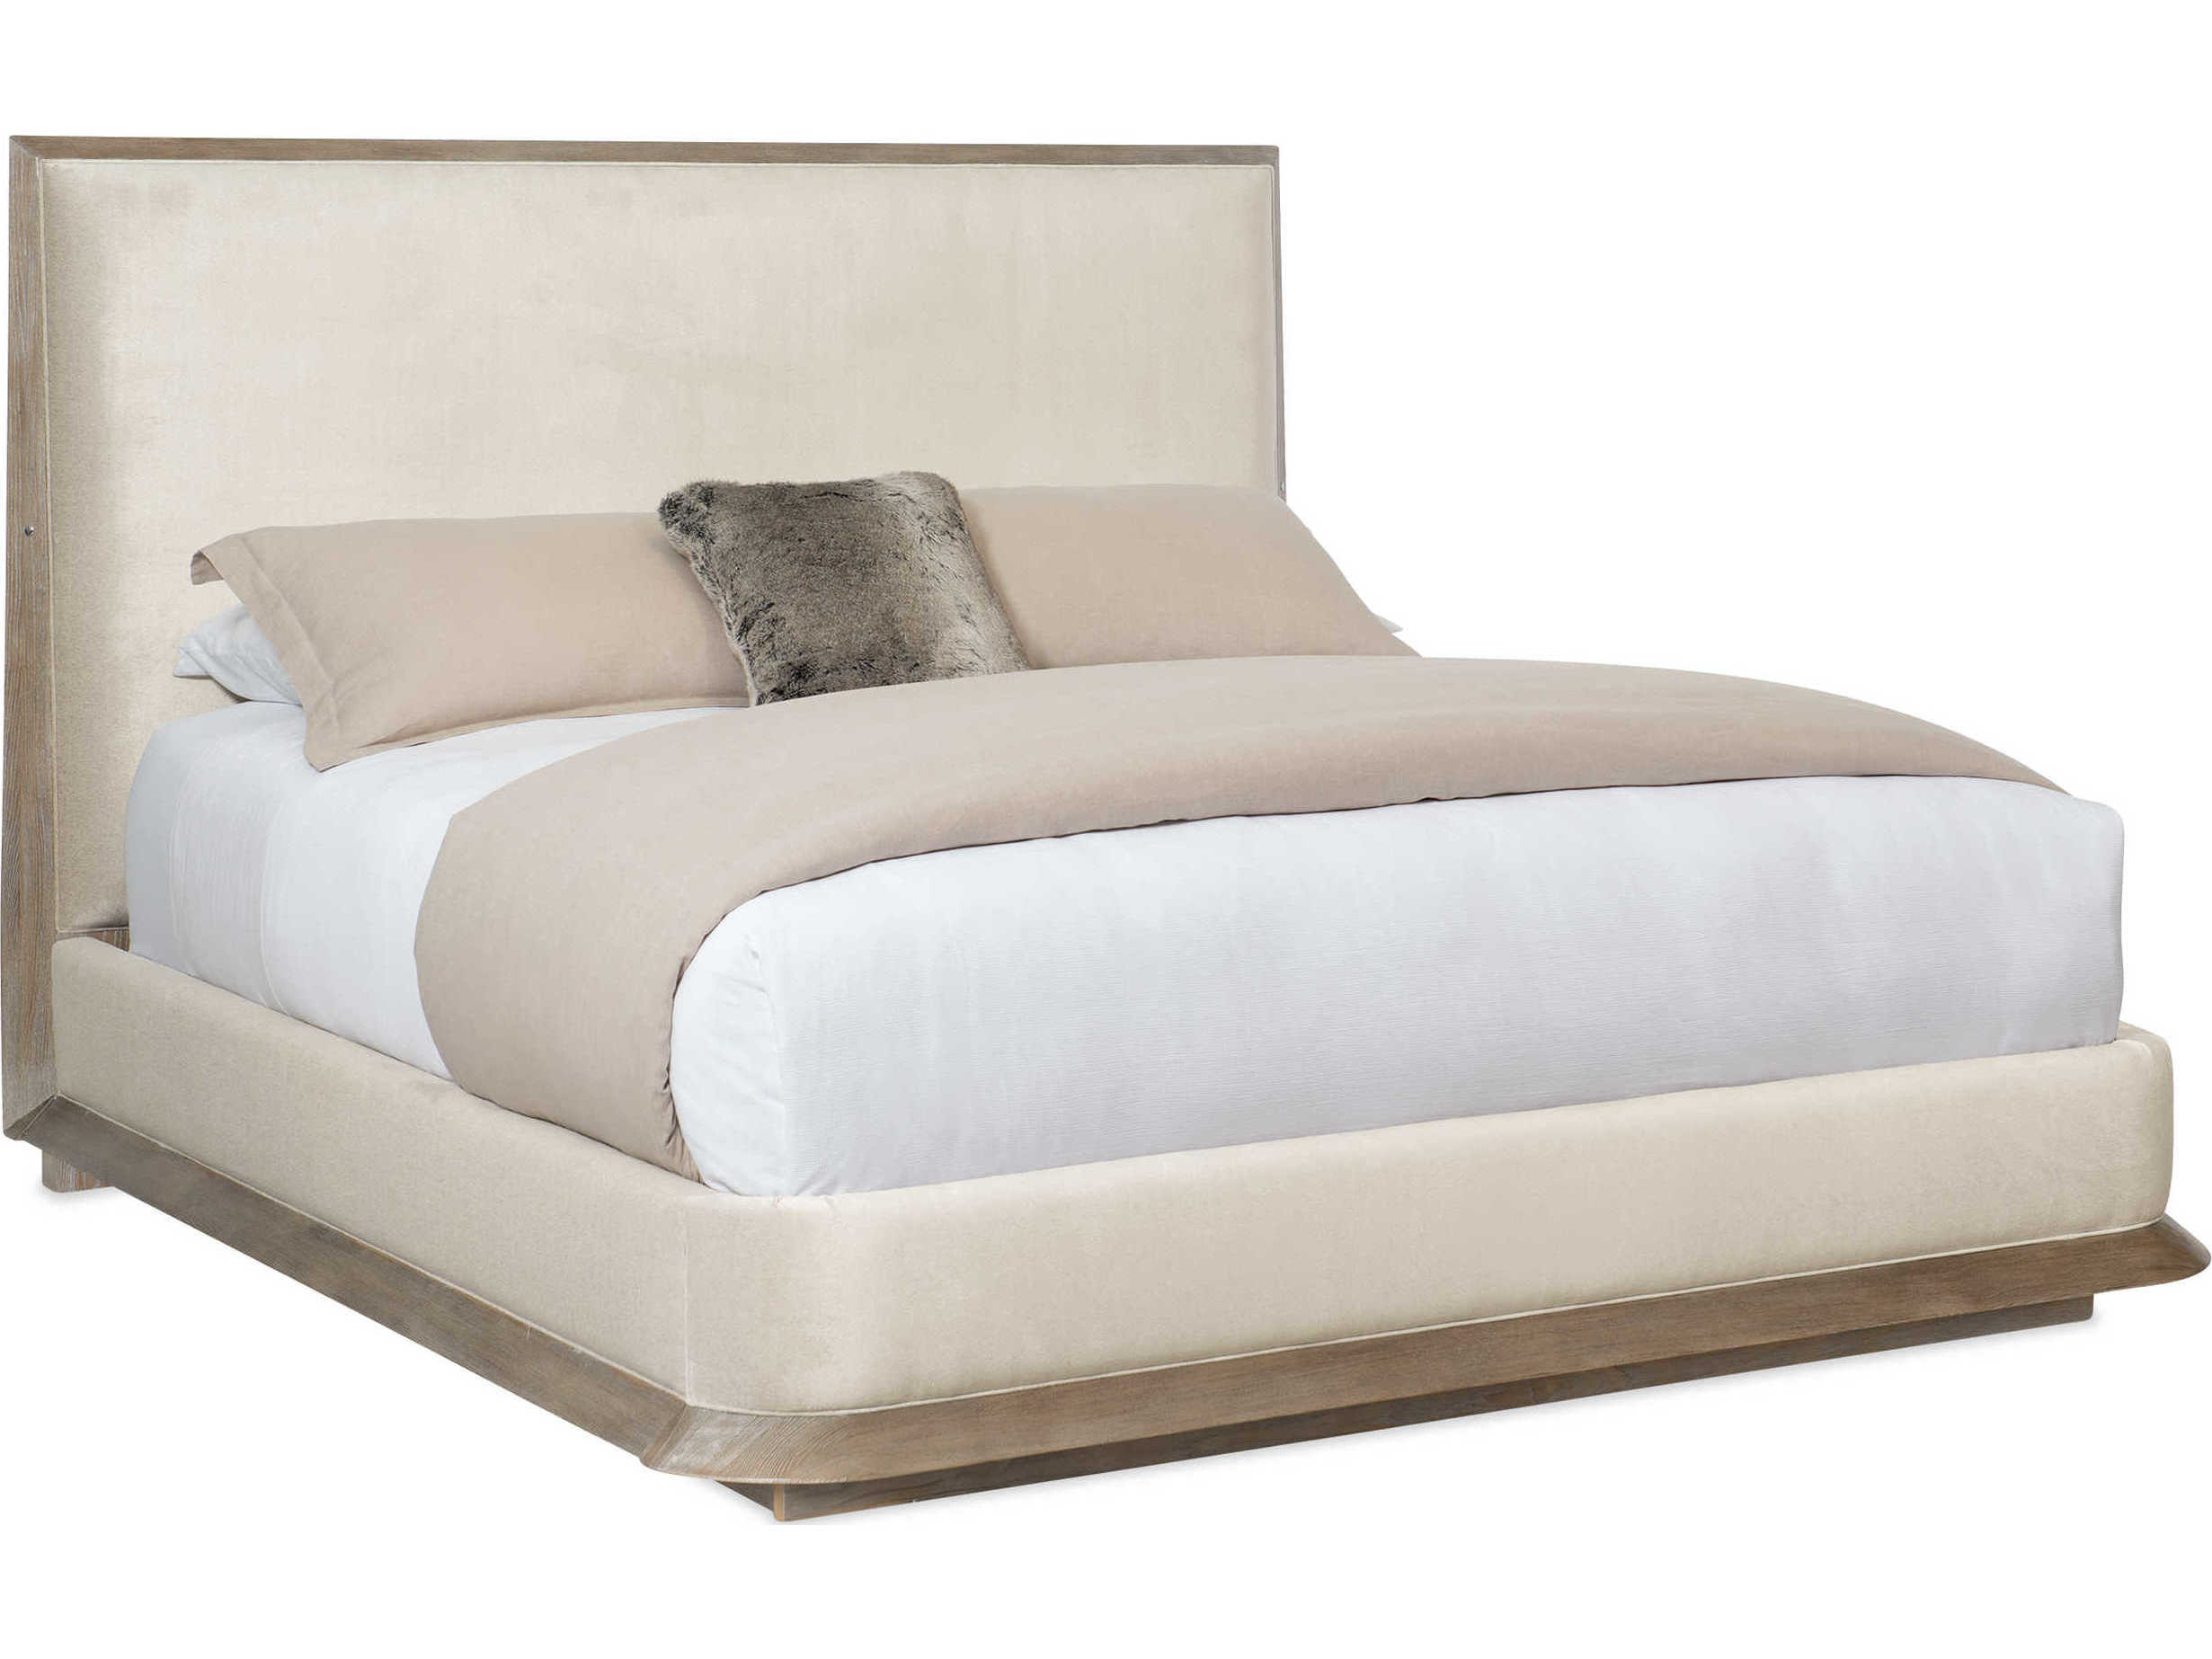 Caracole Classic Ash Driftwood King, Caracole King Bed